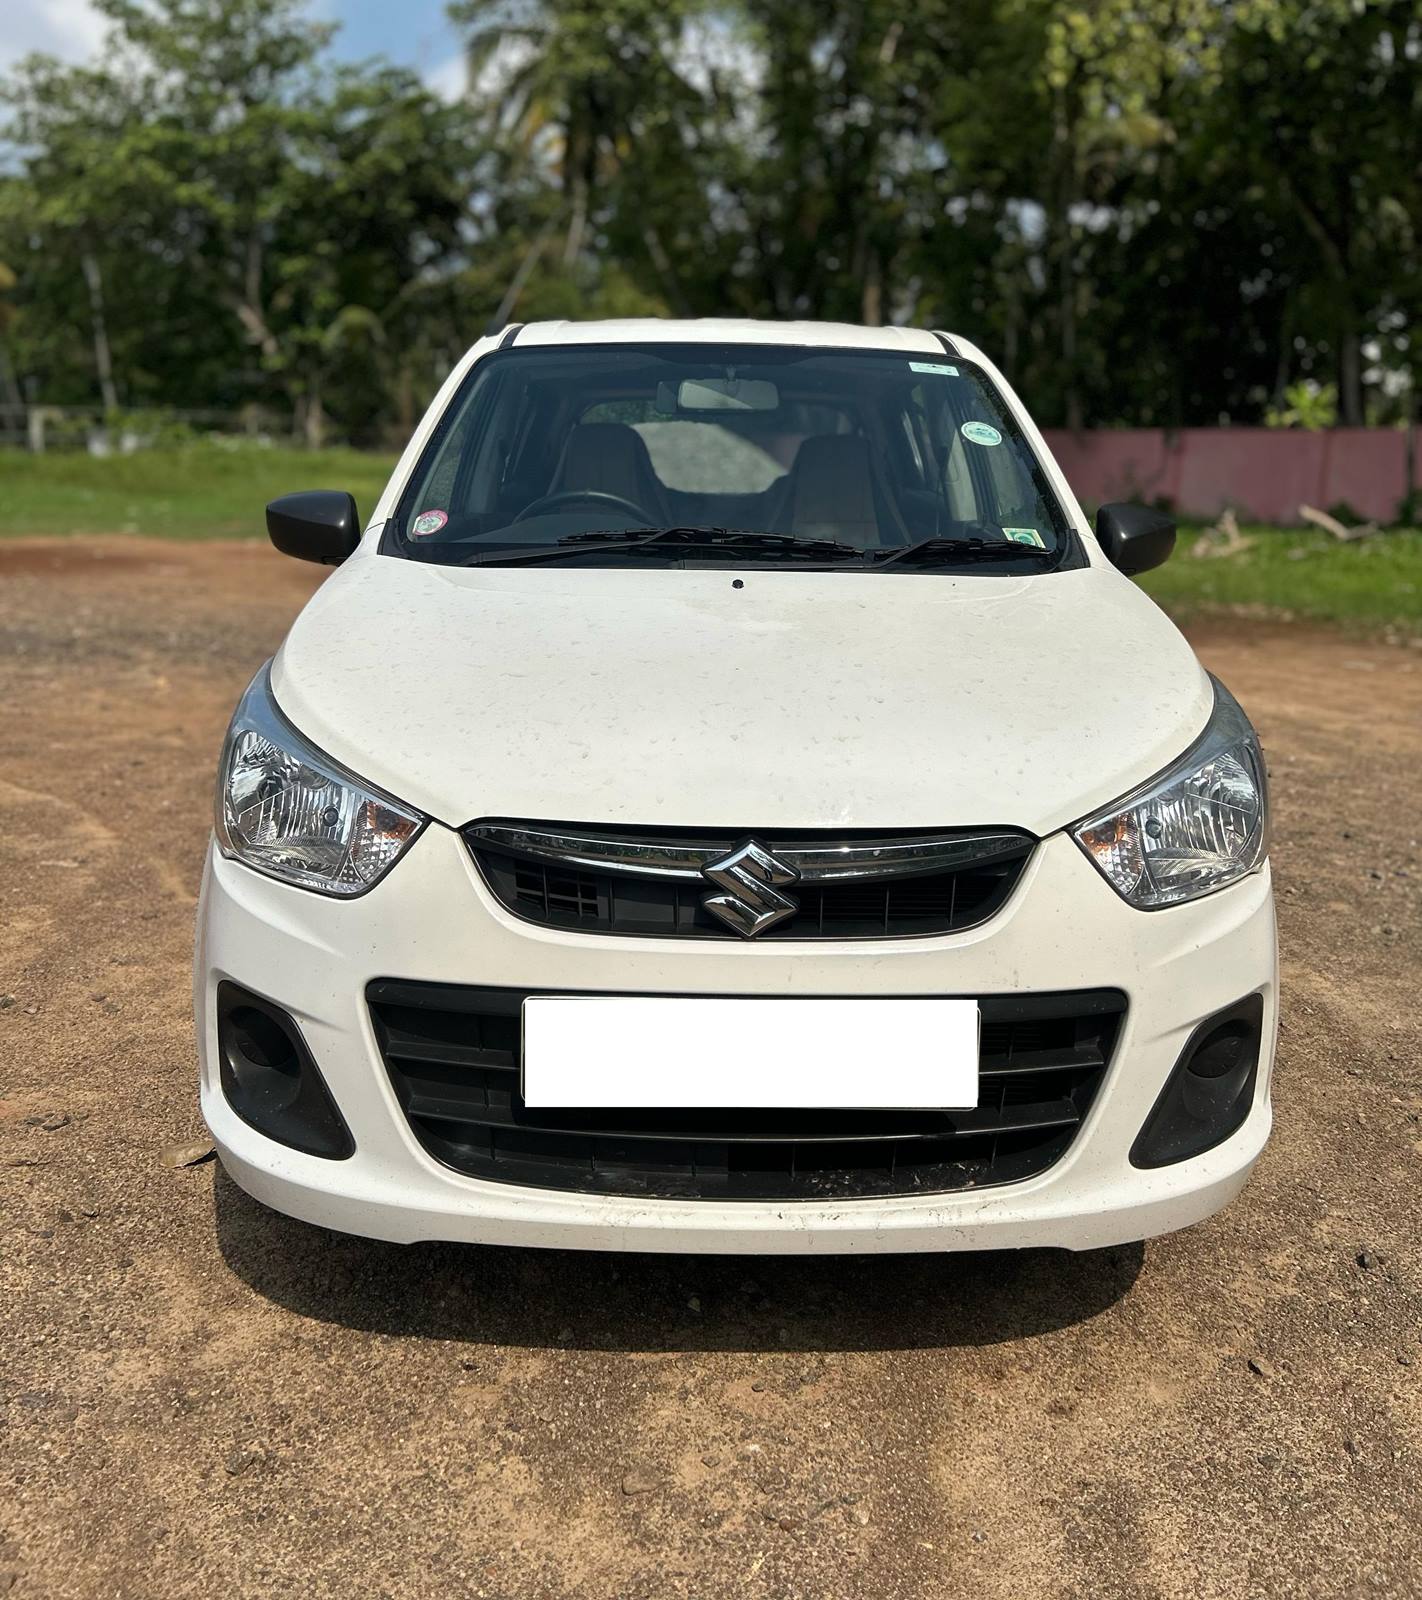 MARUTI K10 2014 Second-hand Car for Sale in Alappuzha